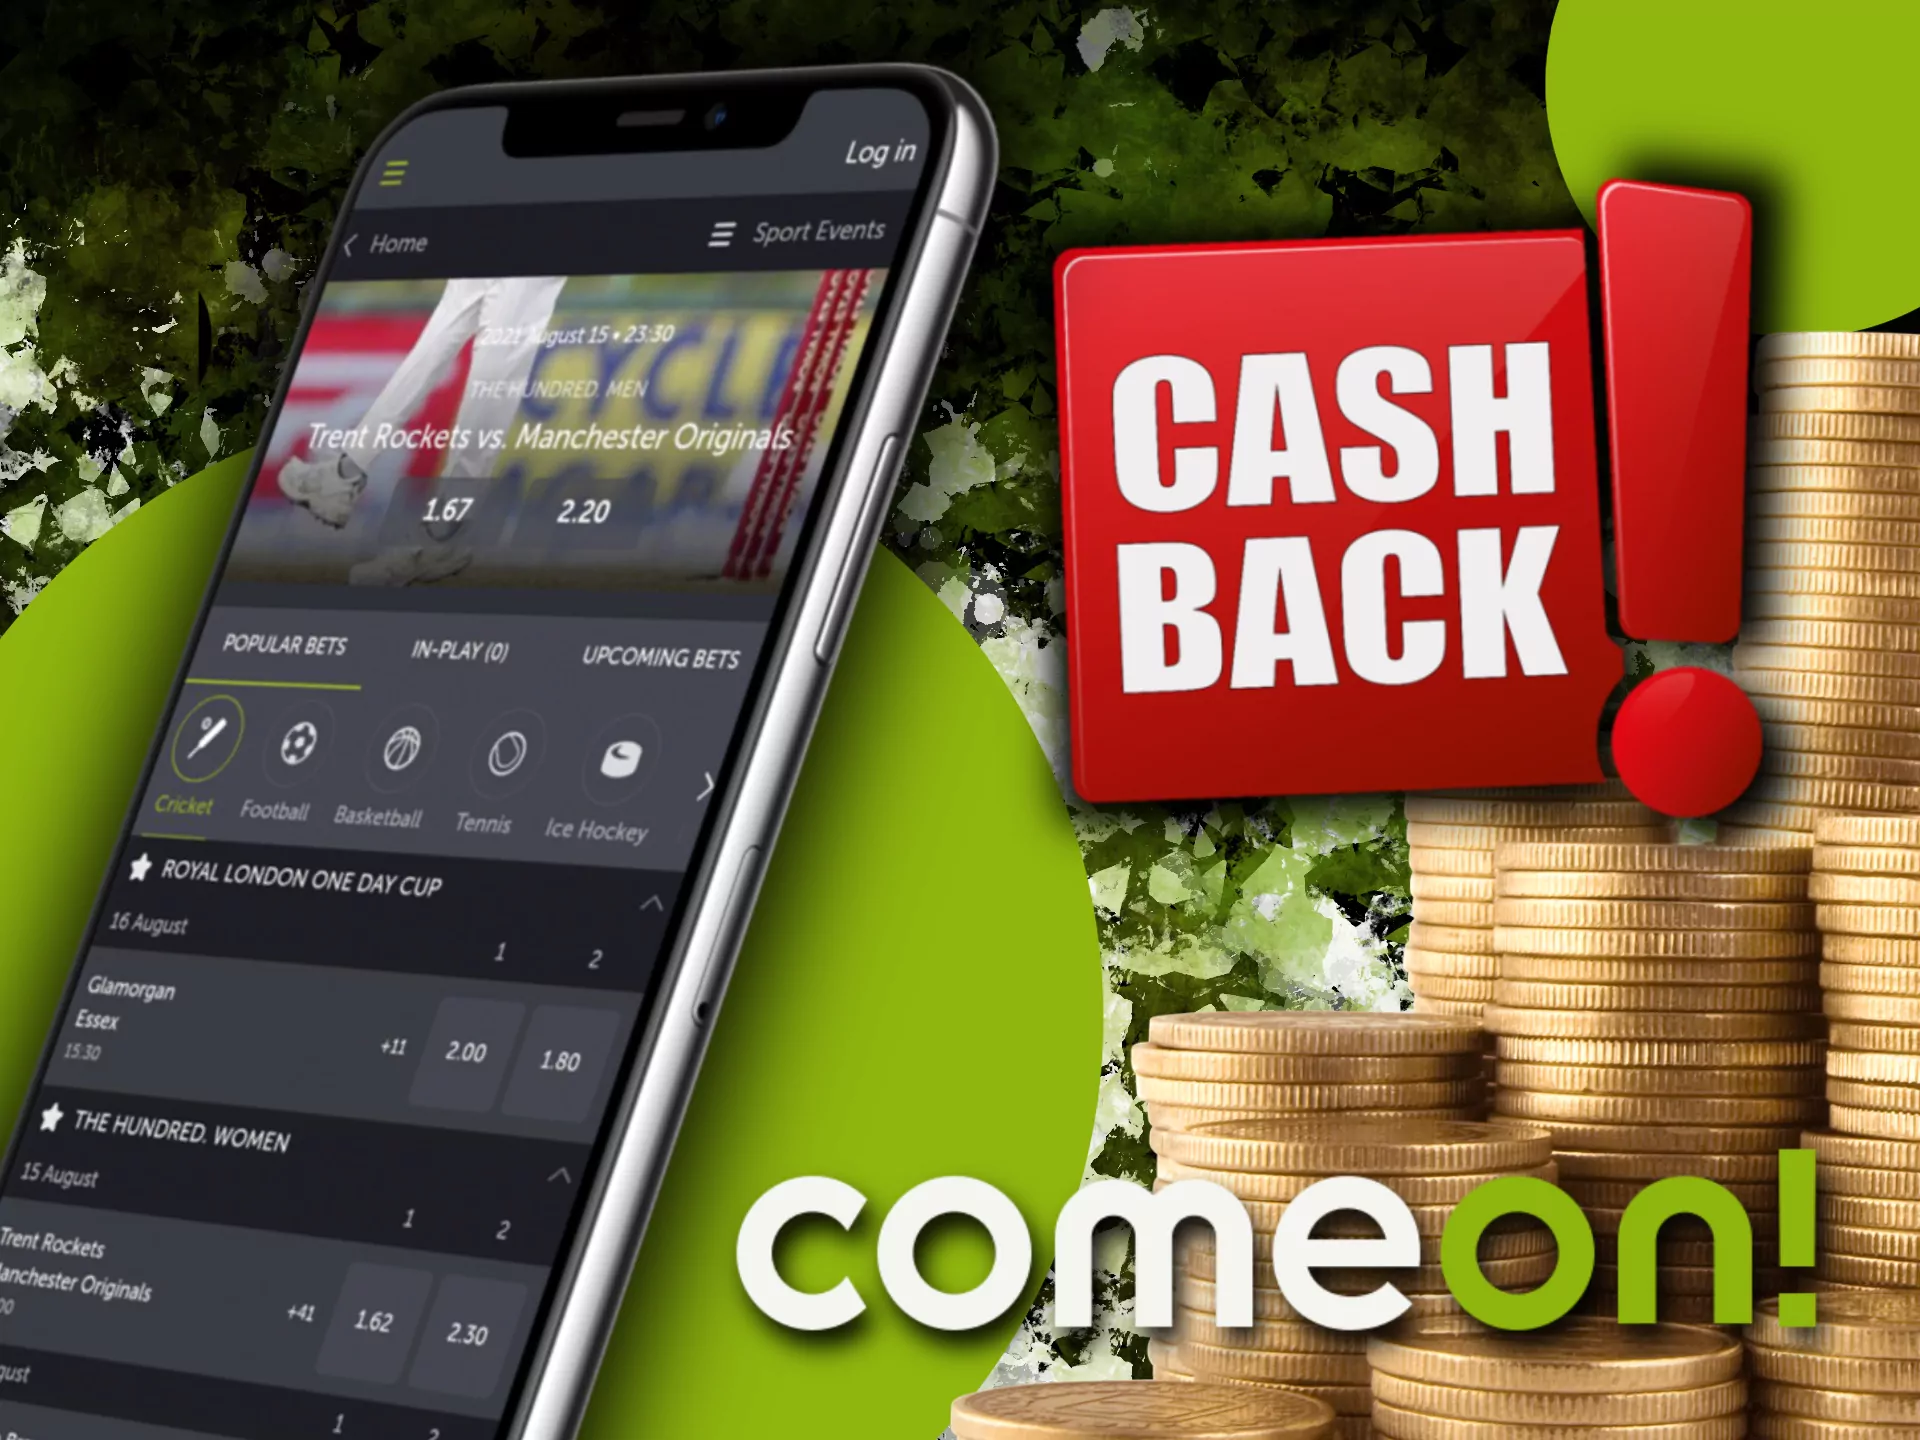 If you place bets regularly you can save some funds with help of the cashback program.